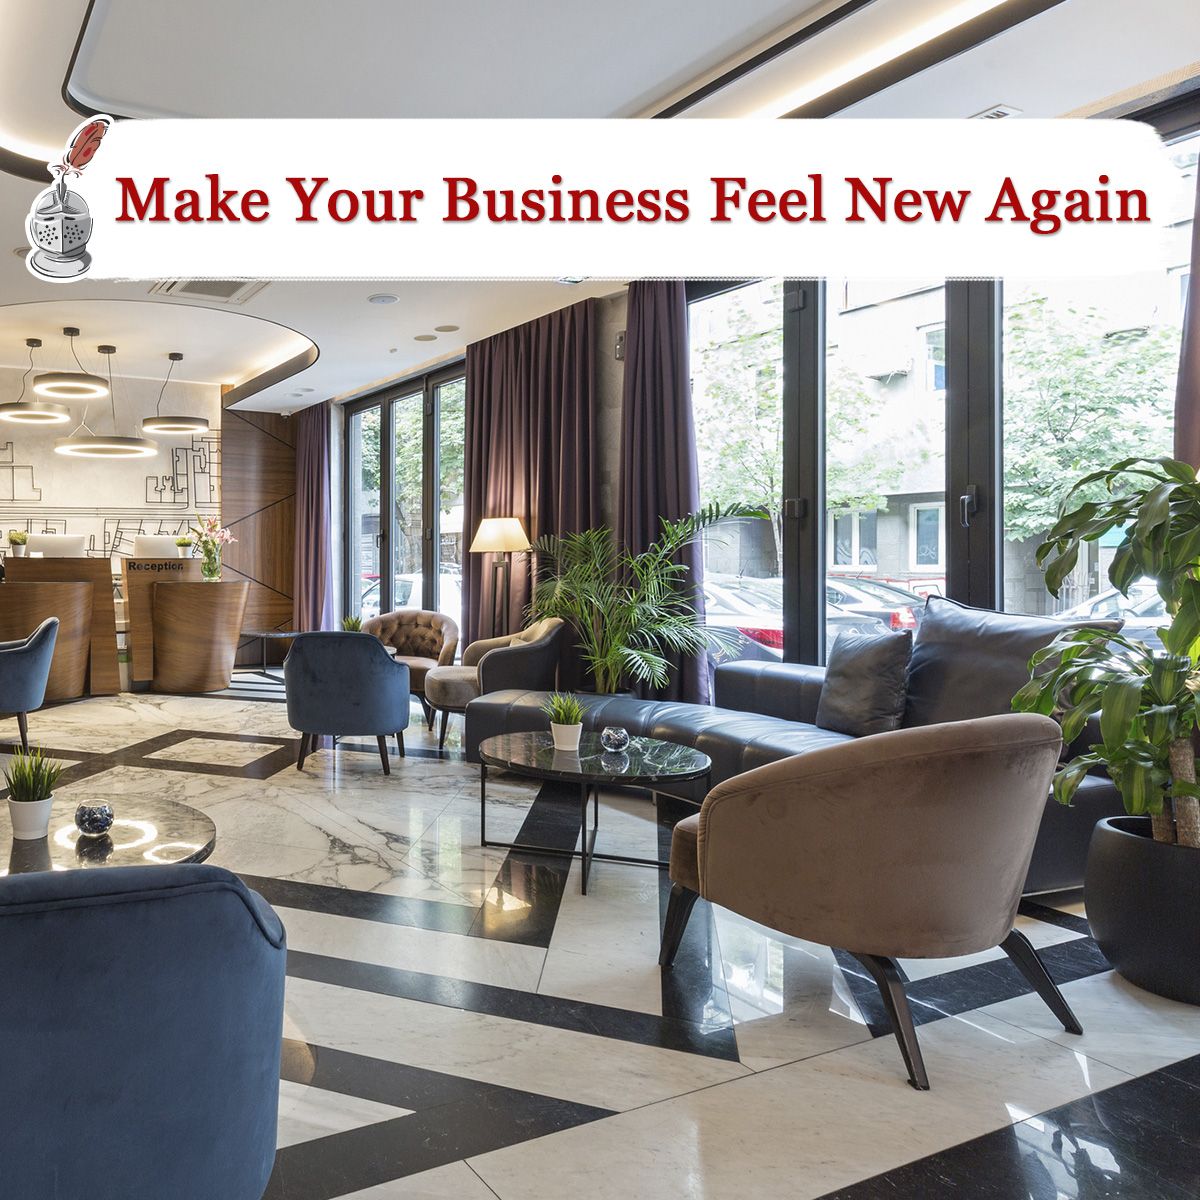 Make Your Business Feel New Again